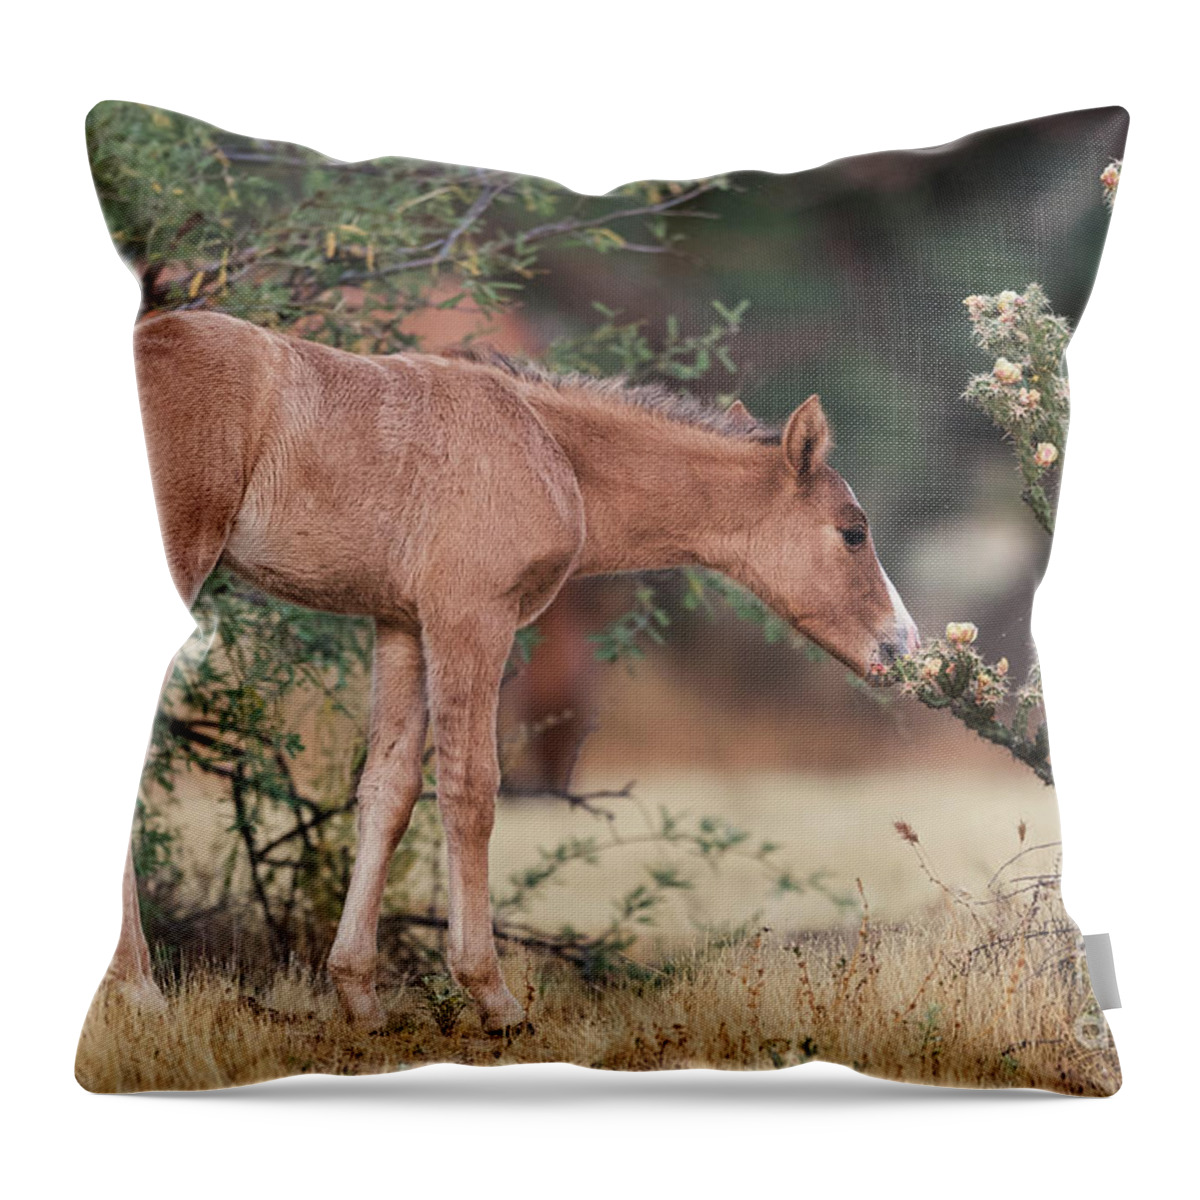 Foal Throw Pillow featuring the photograph Can I Eat This? by Shannon Hastings